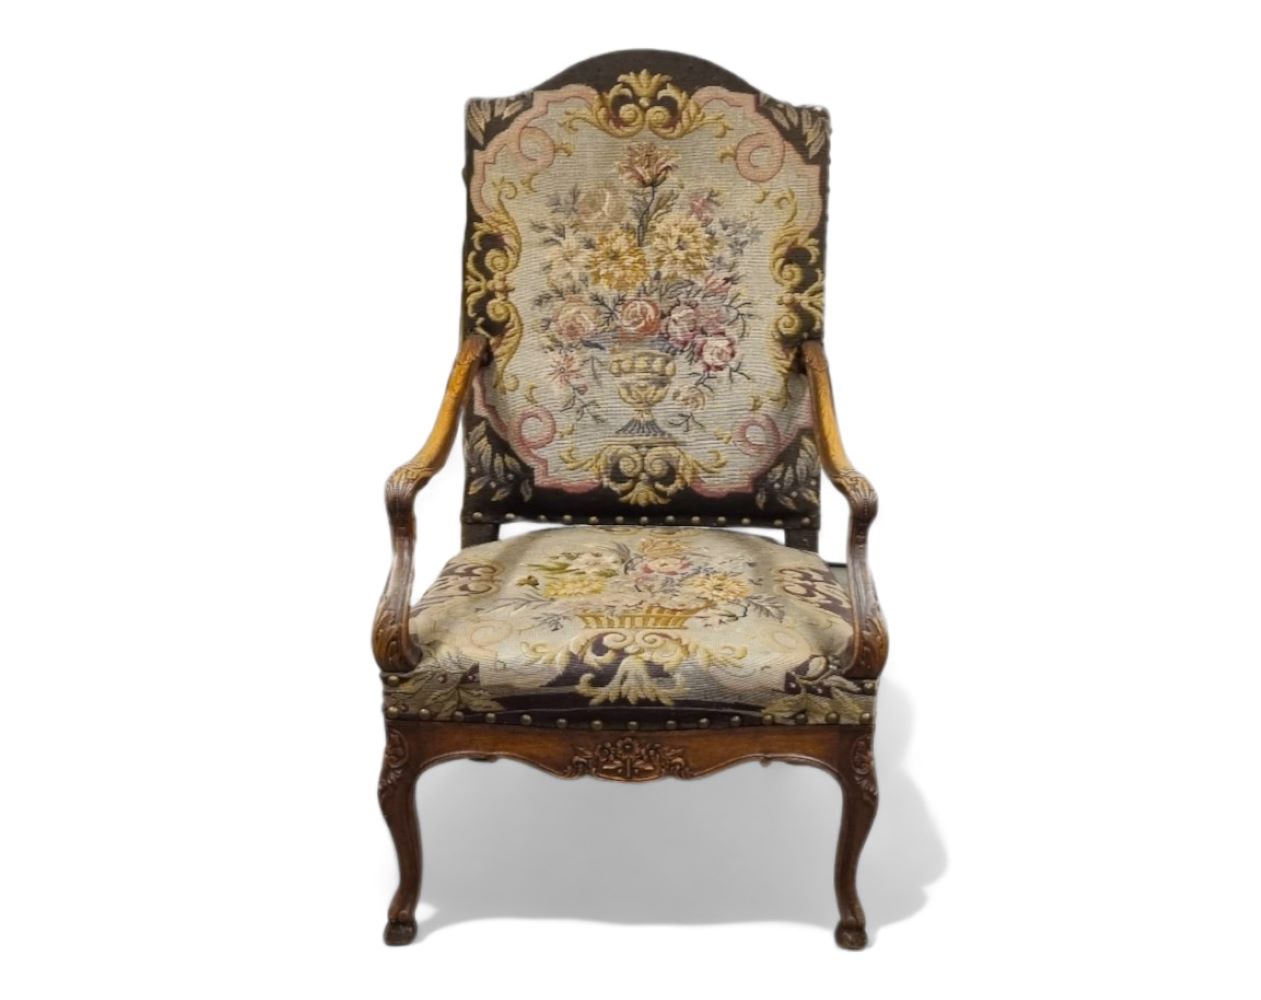 Carved wooden armchair and a seat with floral motifs from the 18th century - Image 4 of 4